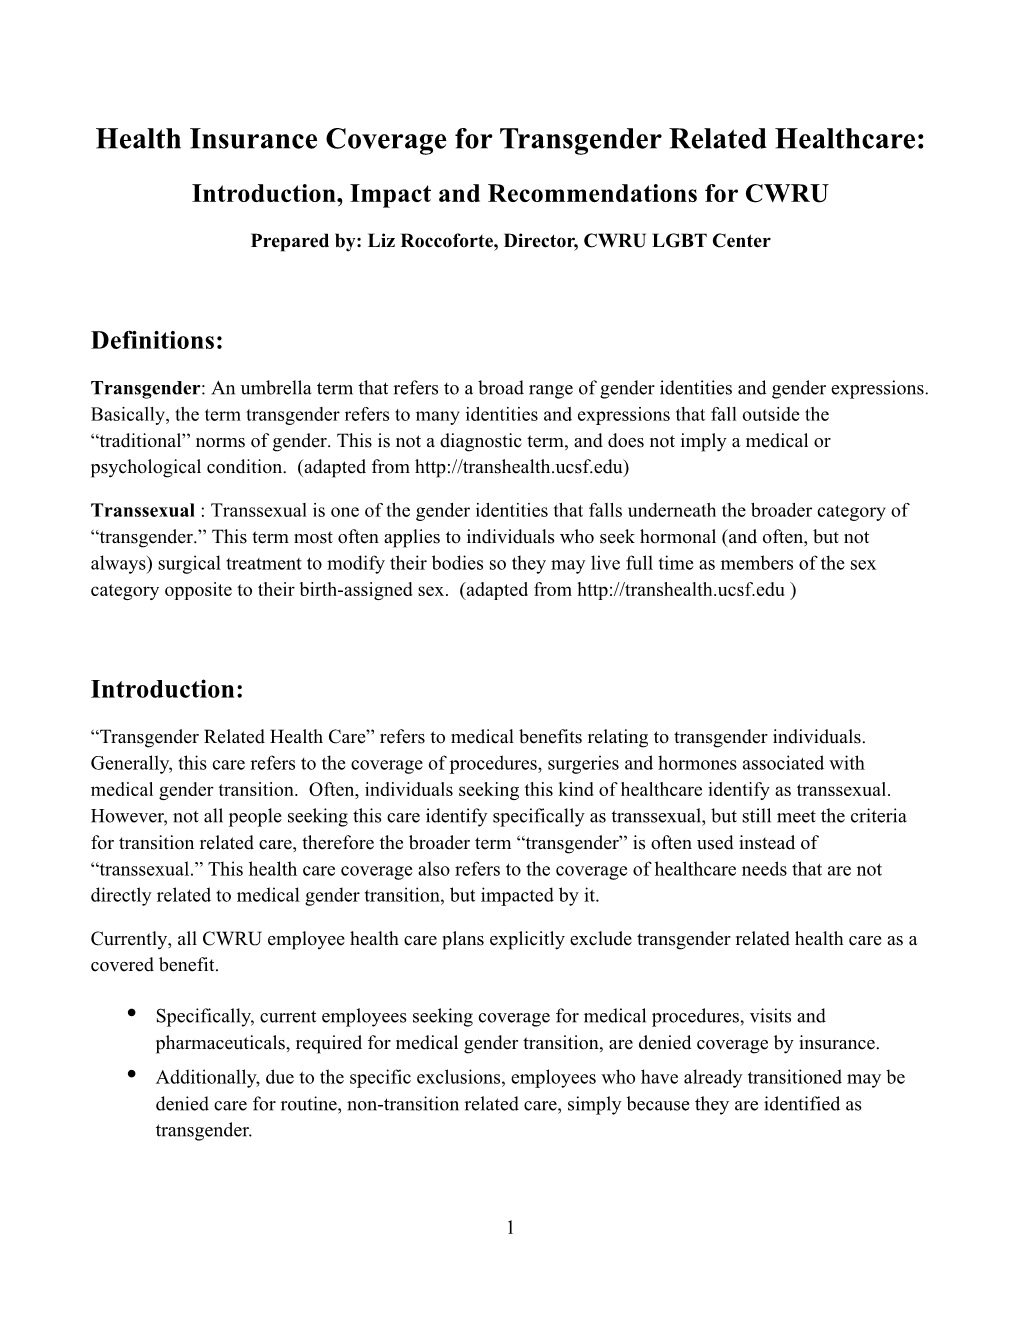 Transgender Health Care Exclusions from CWRU’S Health Care Plans (2013)